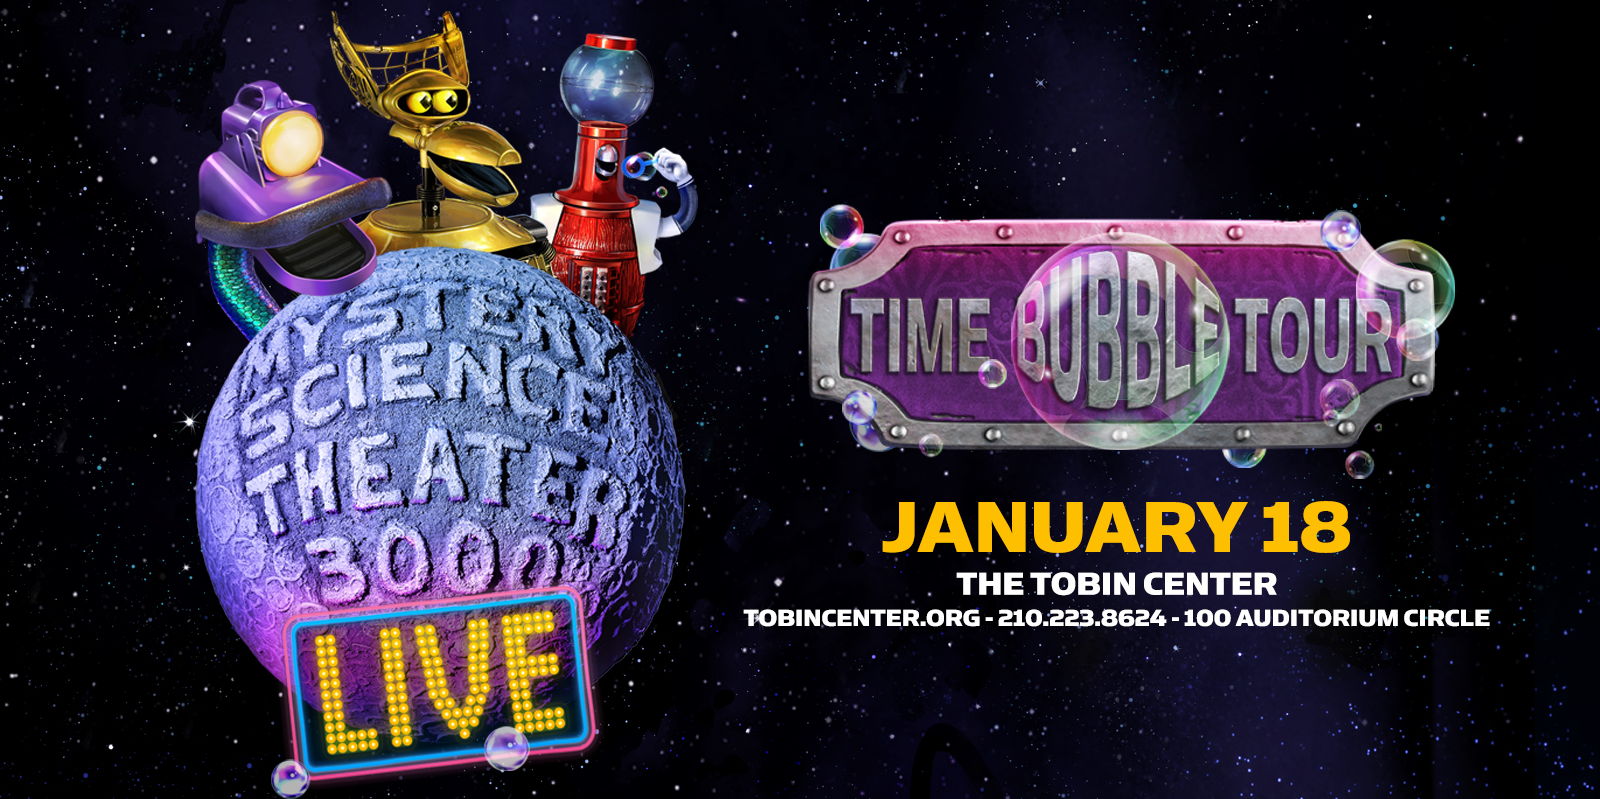 Mystery Science Theater 3000 promotional image